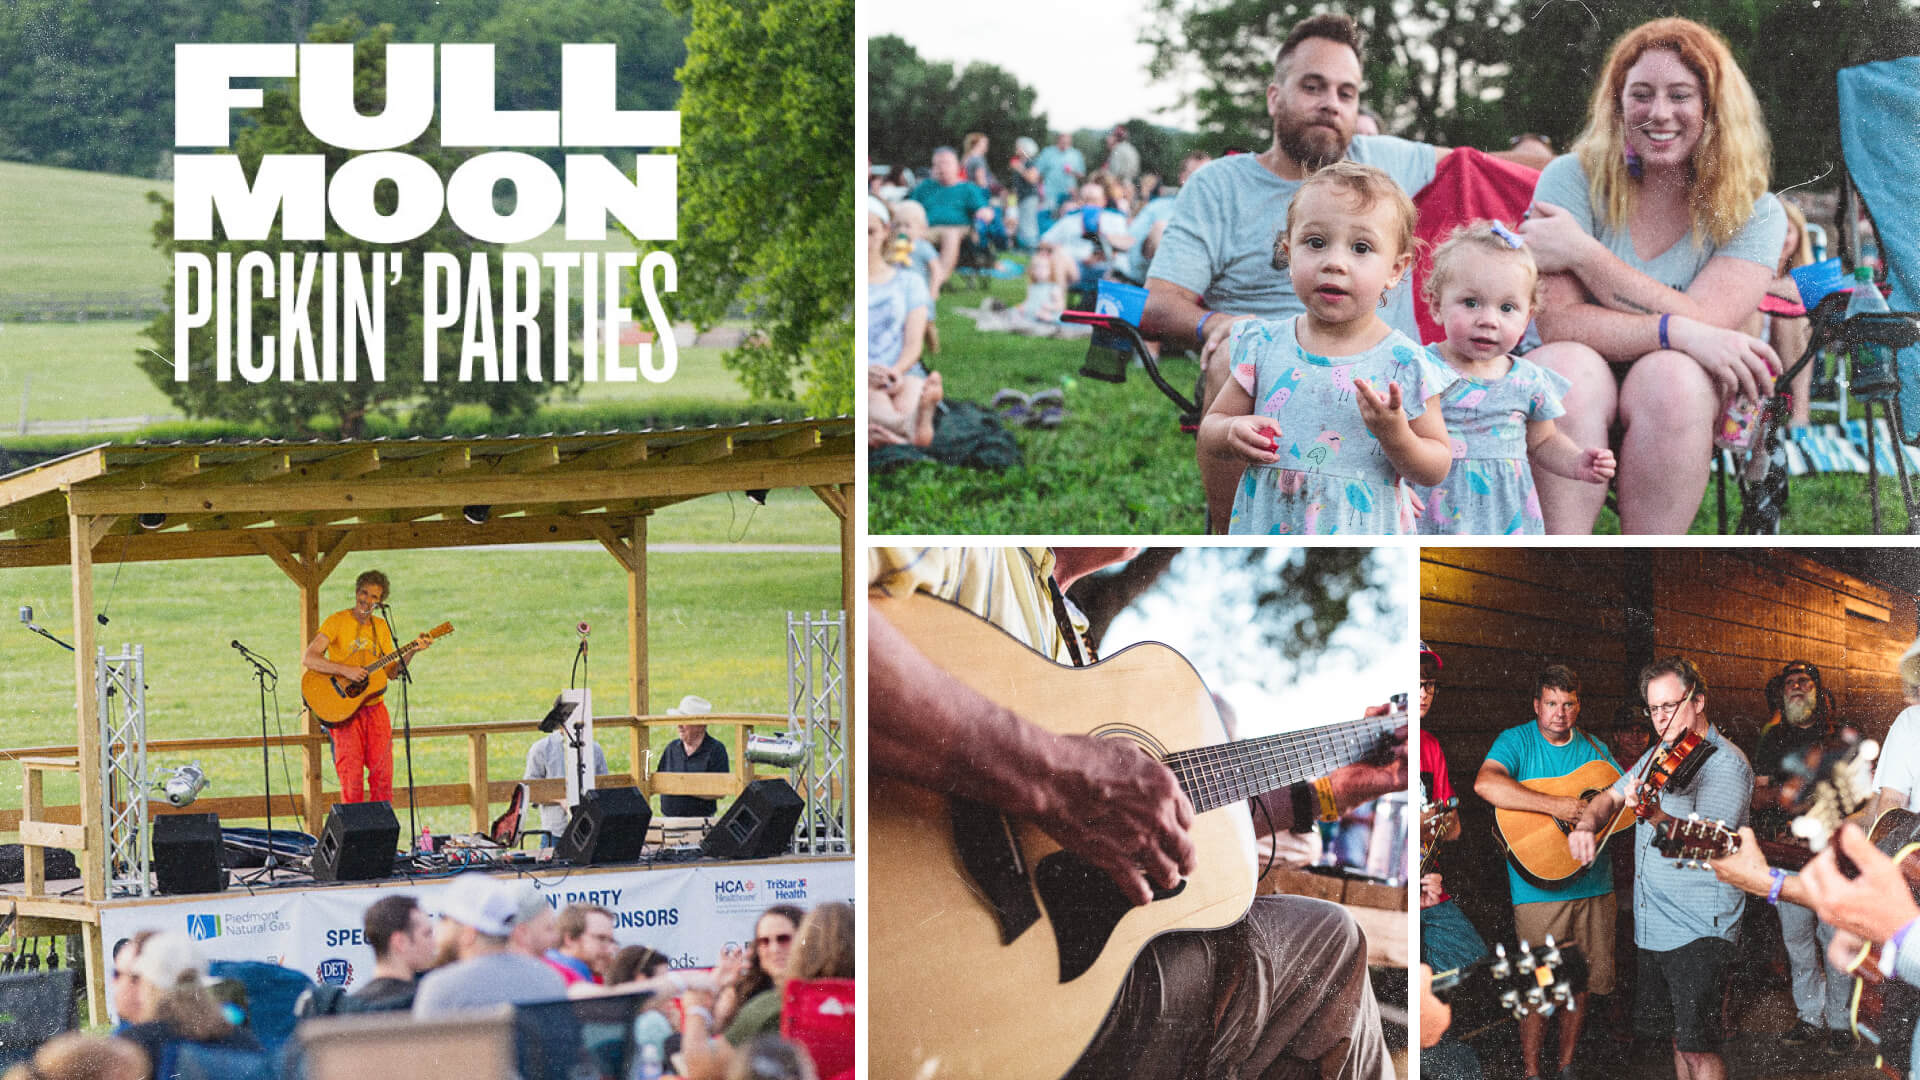 Collage of images from the Full Moon Pickin Party showcasing families enjoying musicians.